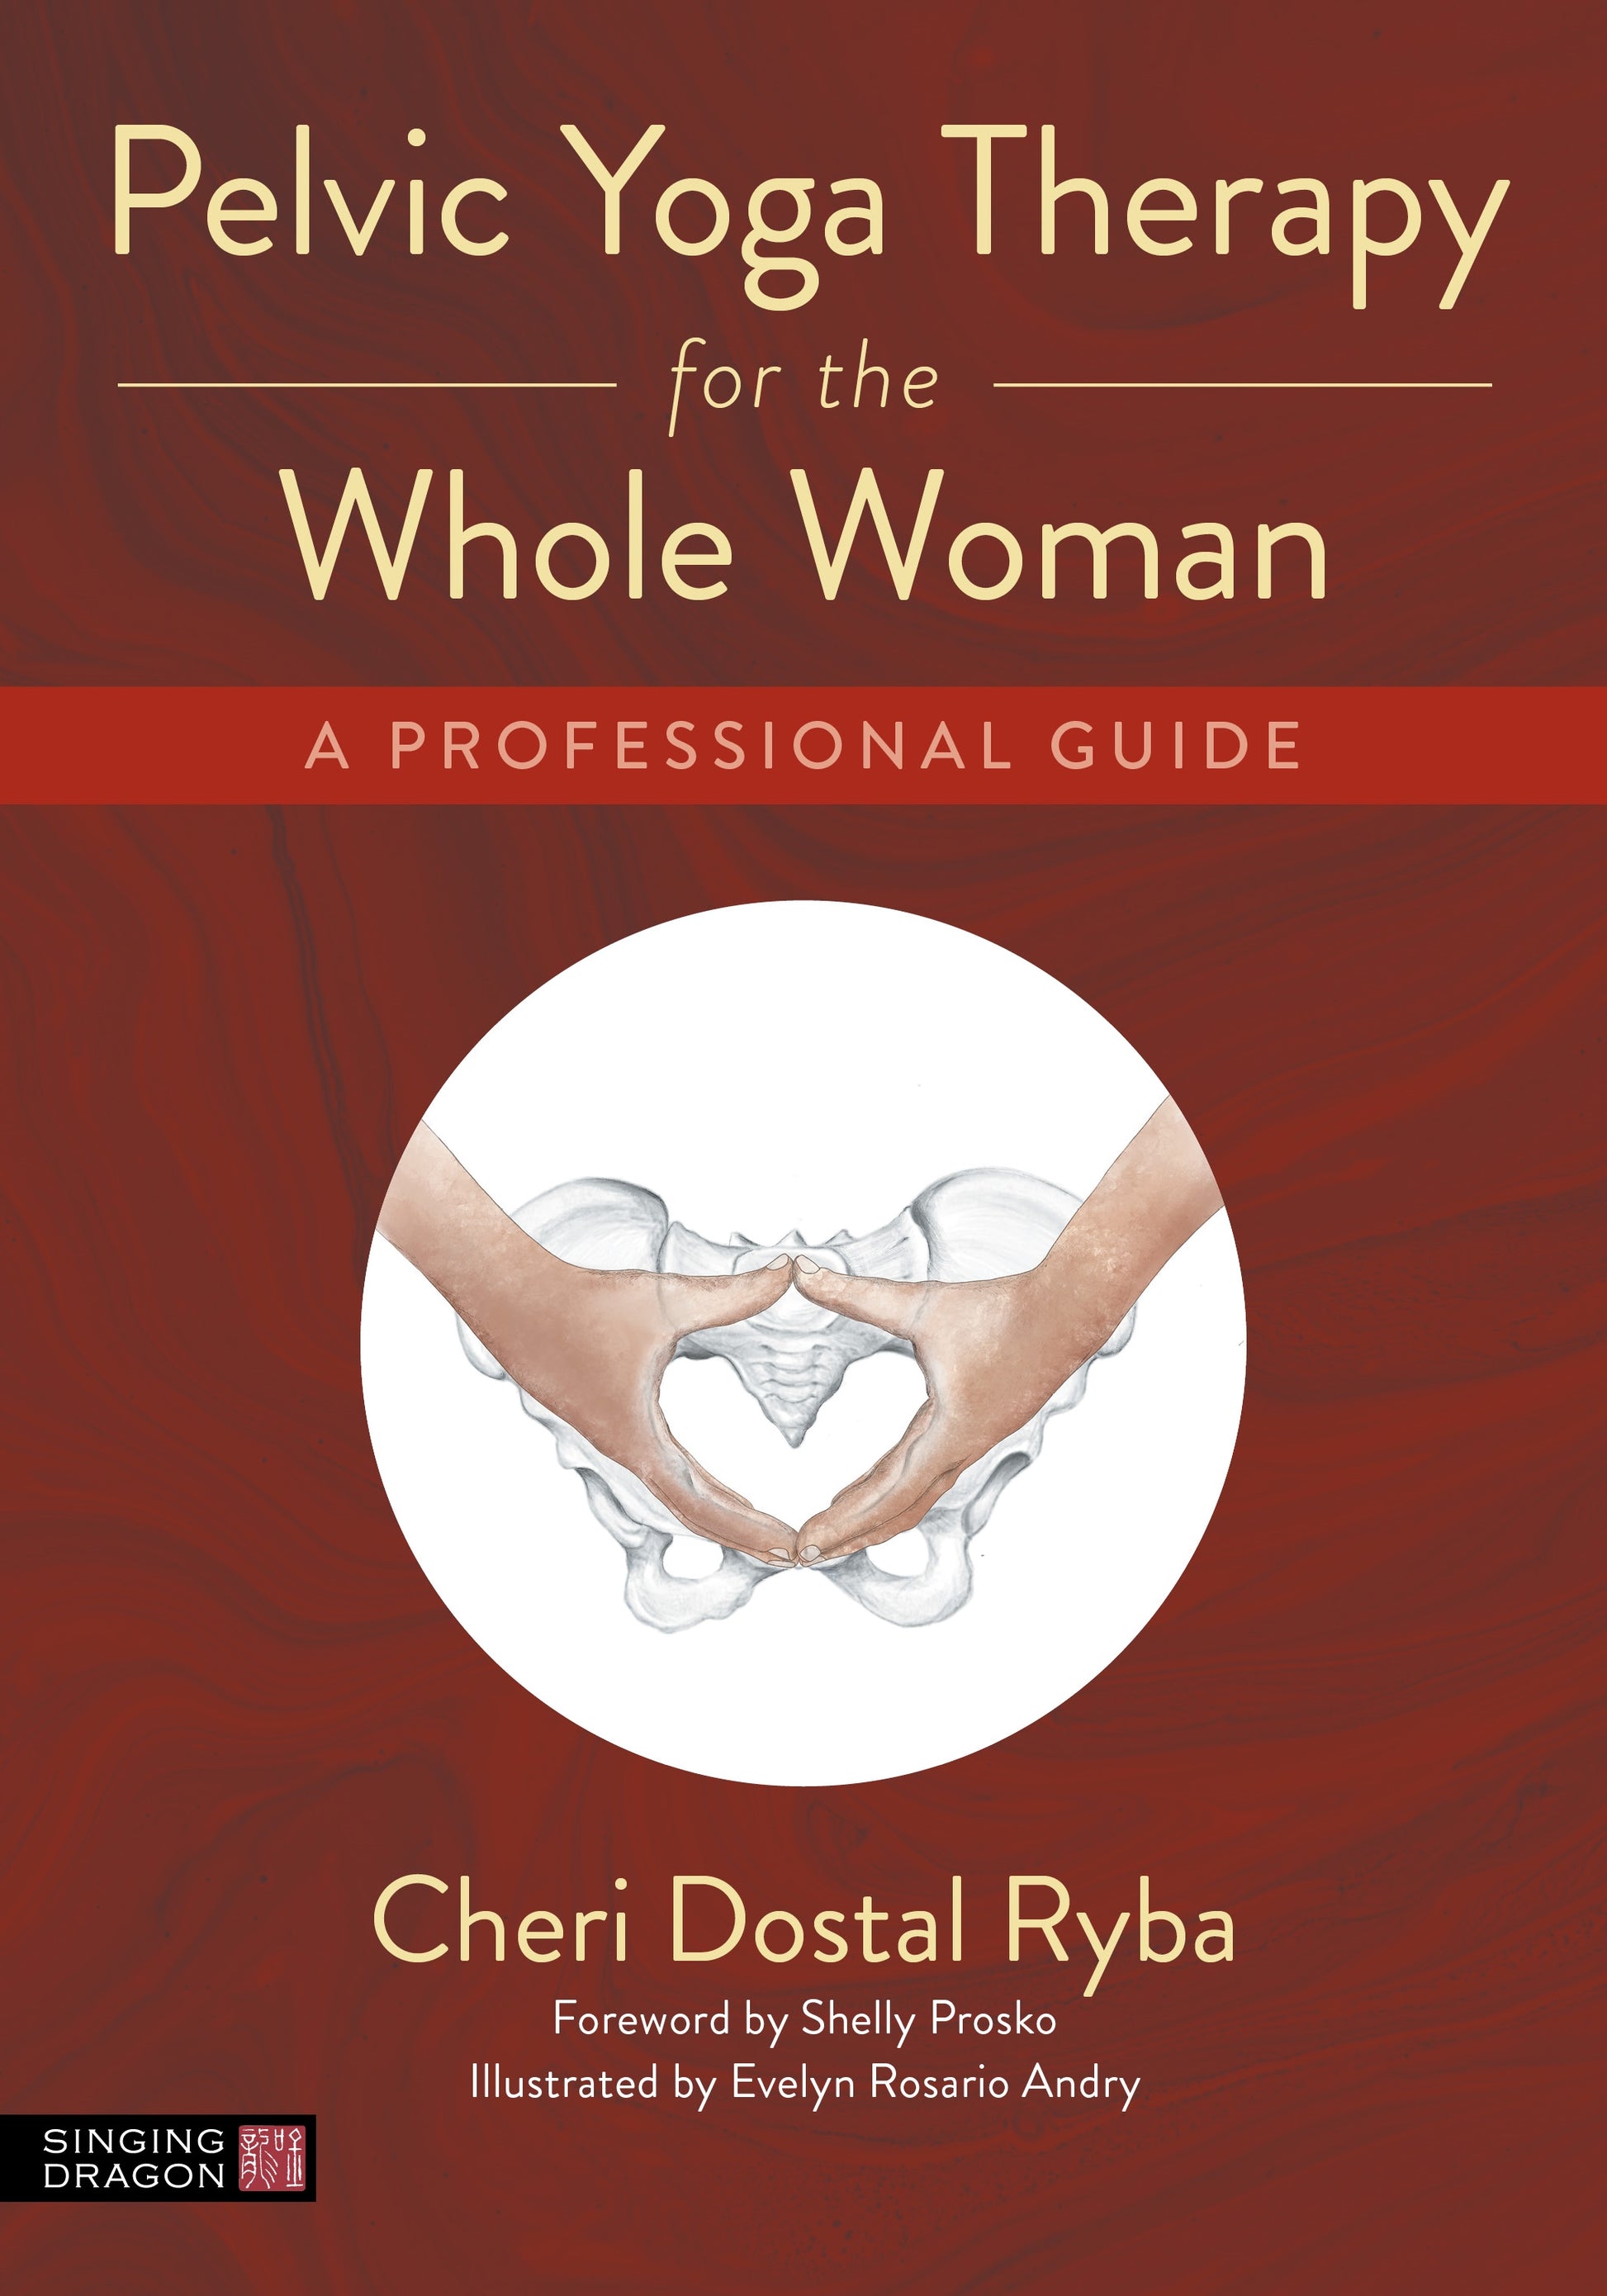 Pelvic Yoga Therapy for the Whole Woman by Shelly Prosko, Evelyn Rosario Andry, Cheri Dostal Ryba